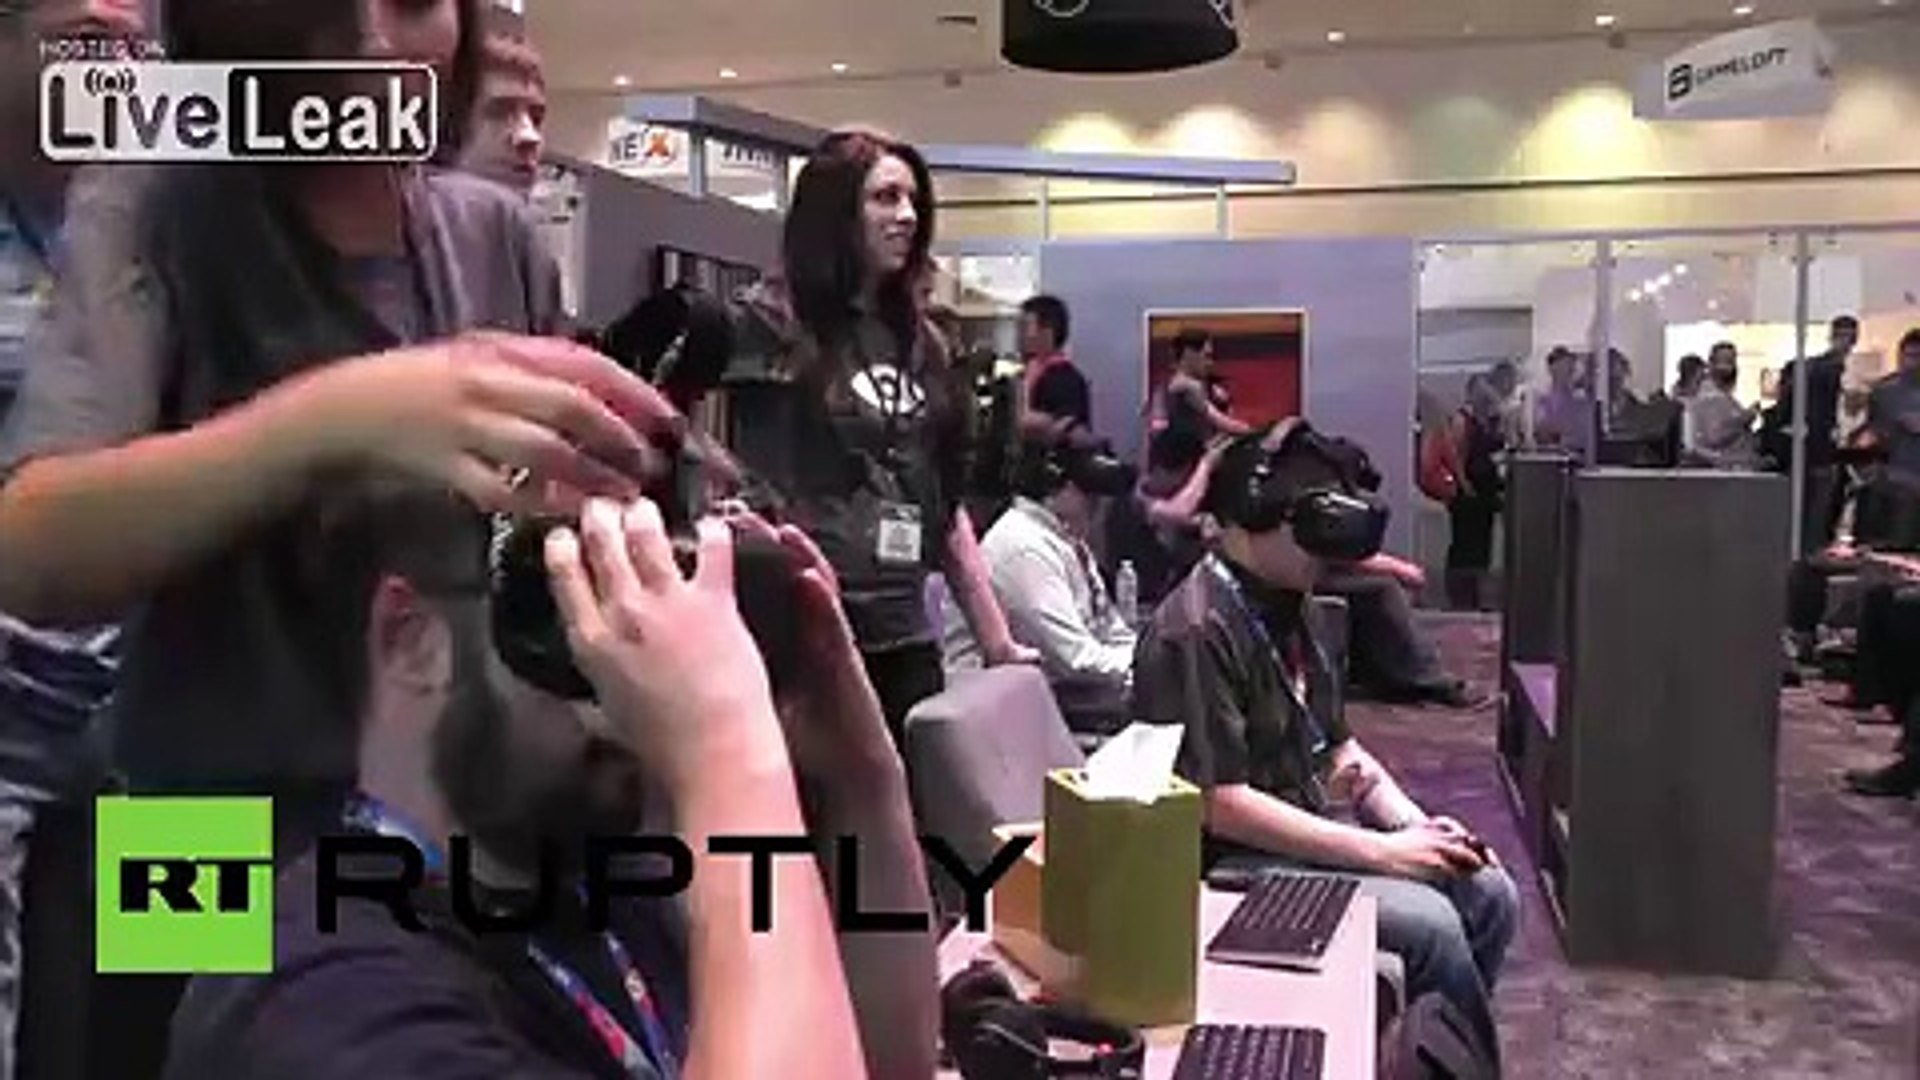 USA: This is the latest in virtual reality headset gaming